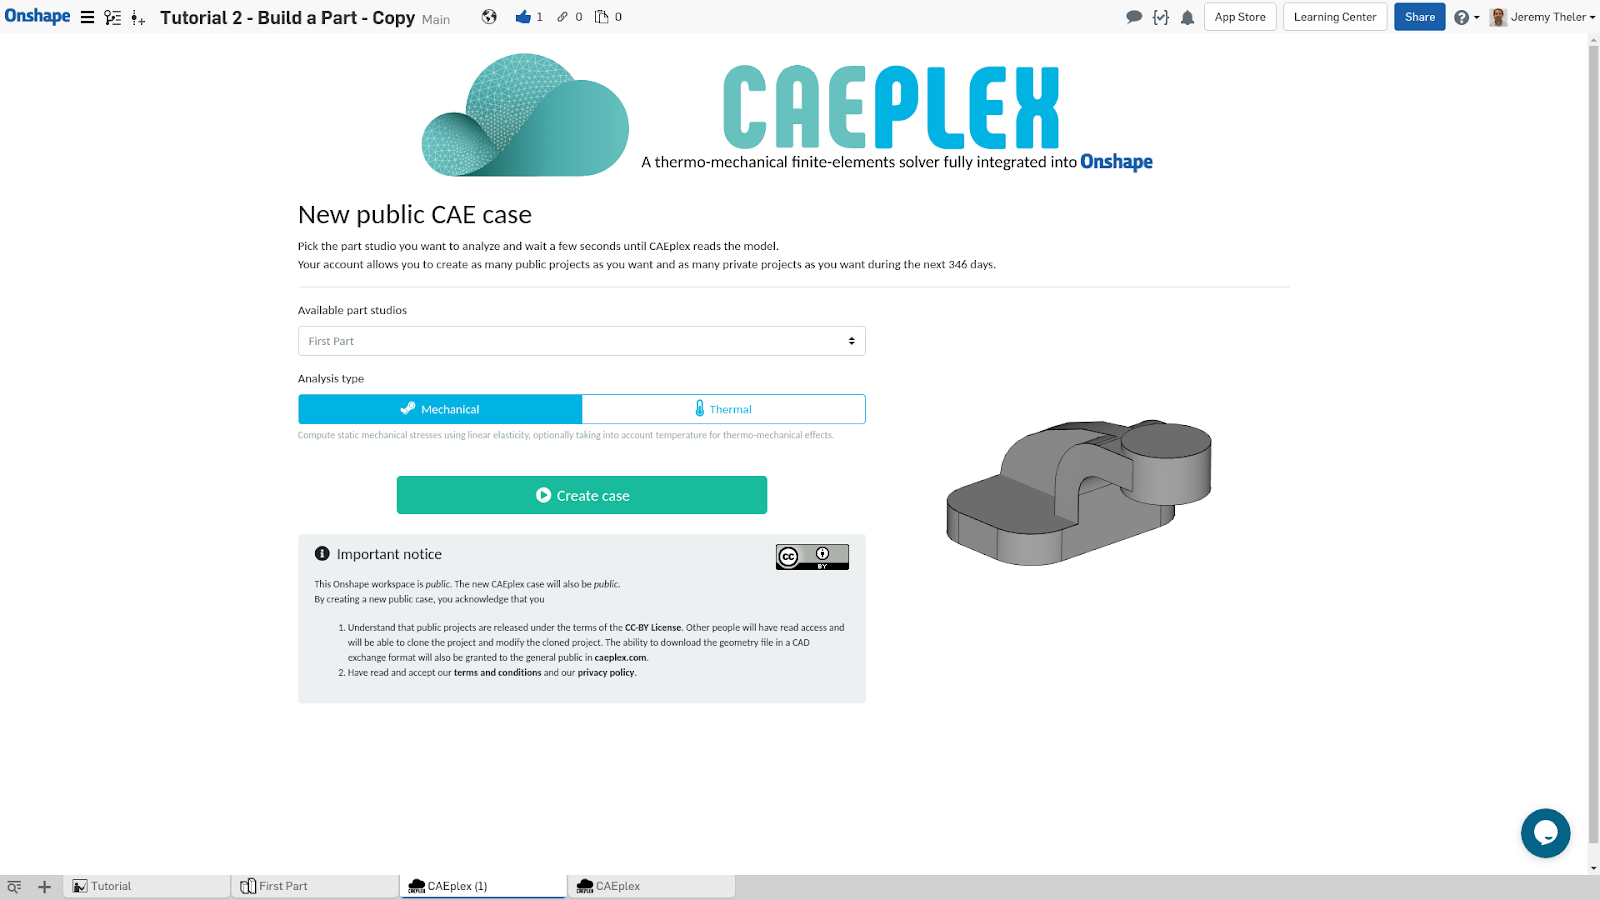 Screenshot of the CAEplex App, which conducts finite-element analysis (FEA) tests inside an Onshape Document.